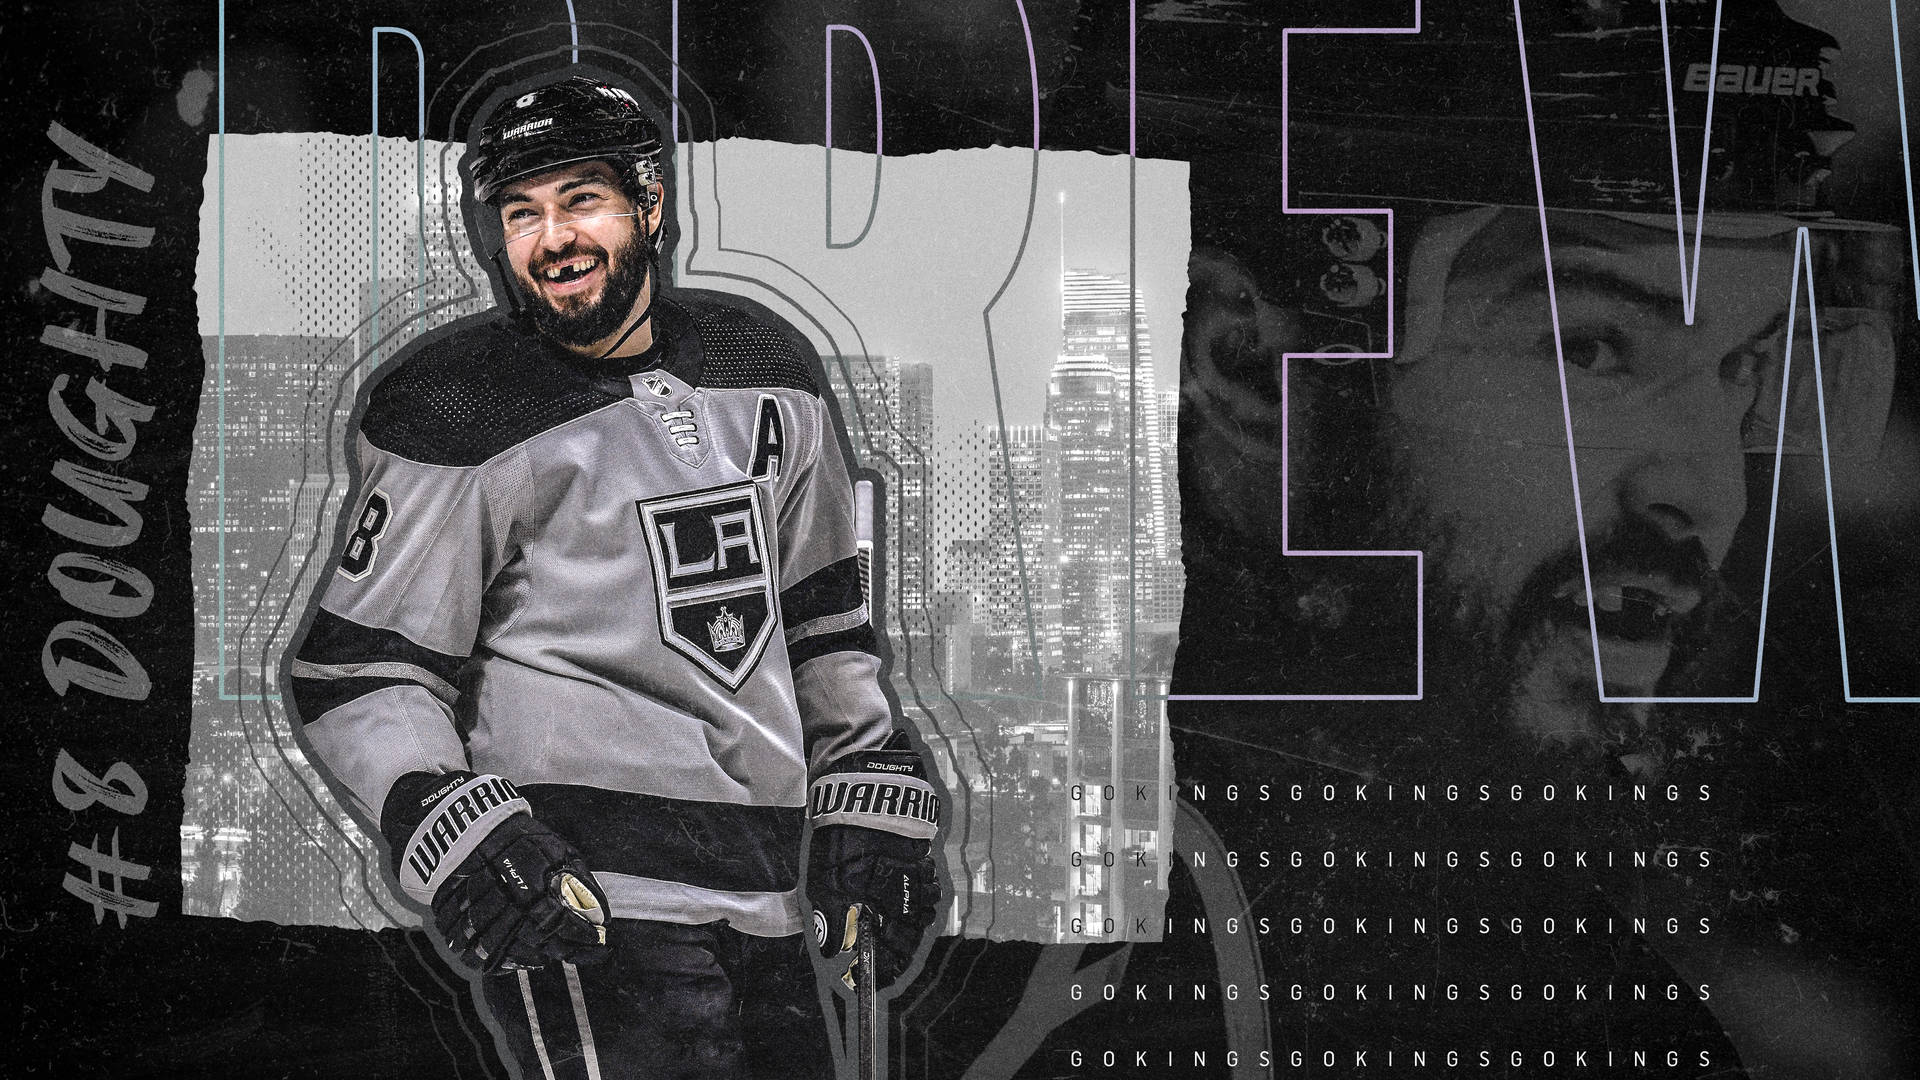 Drew Doughty lost another tooth! Still gorgeous